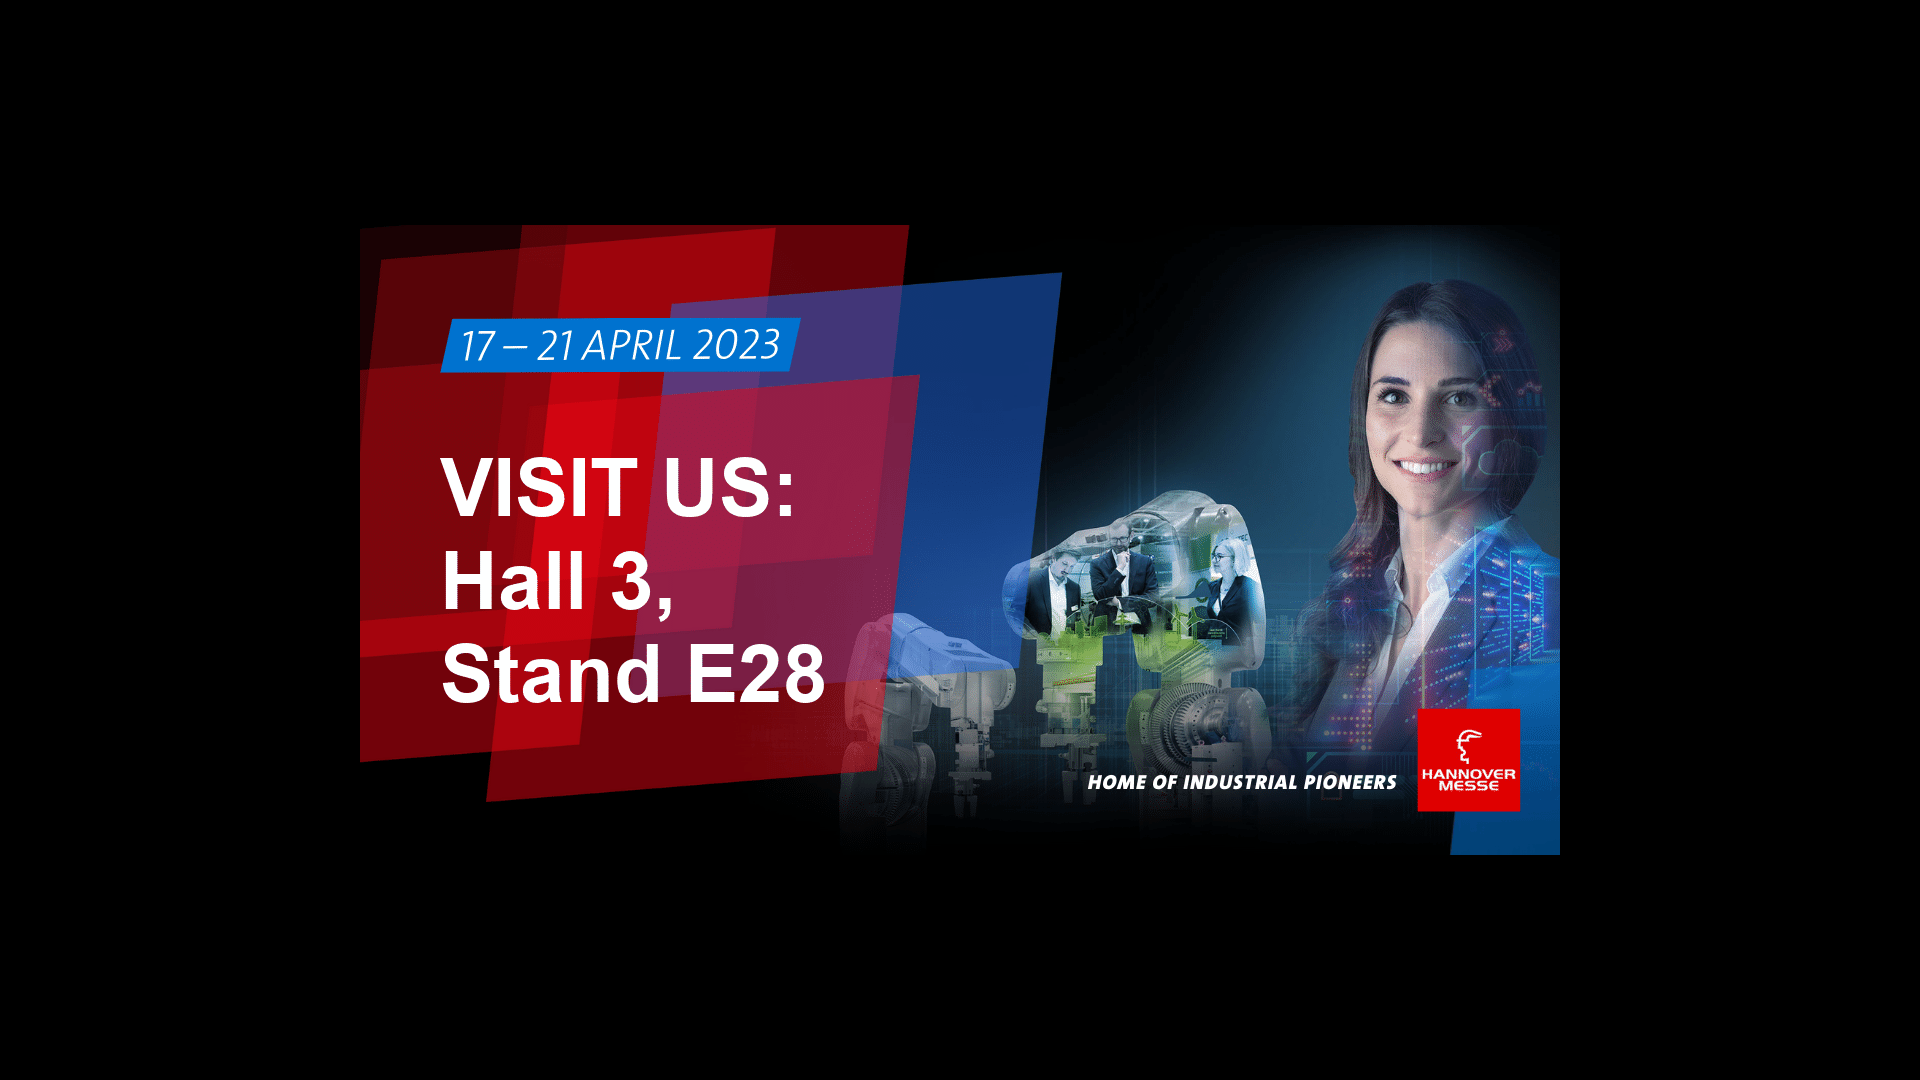 Extrusal returns to Hannover Messe 0